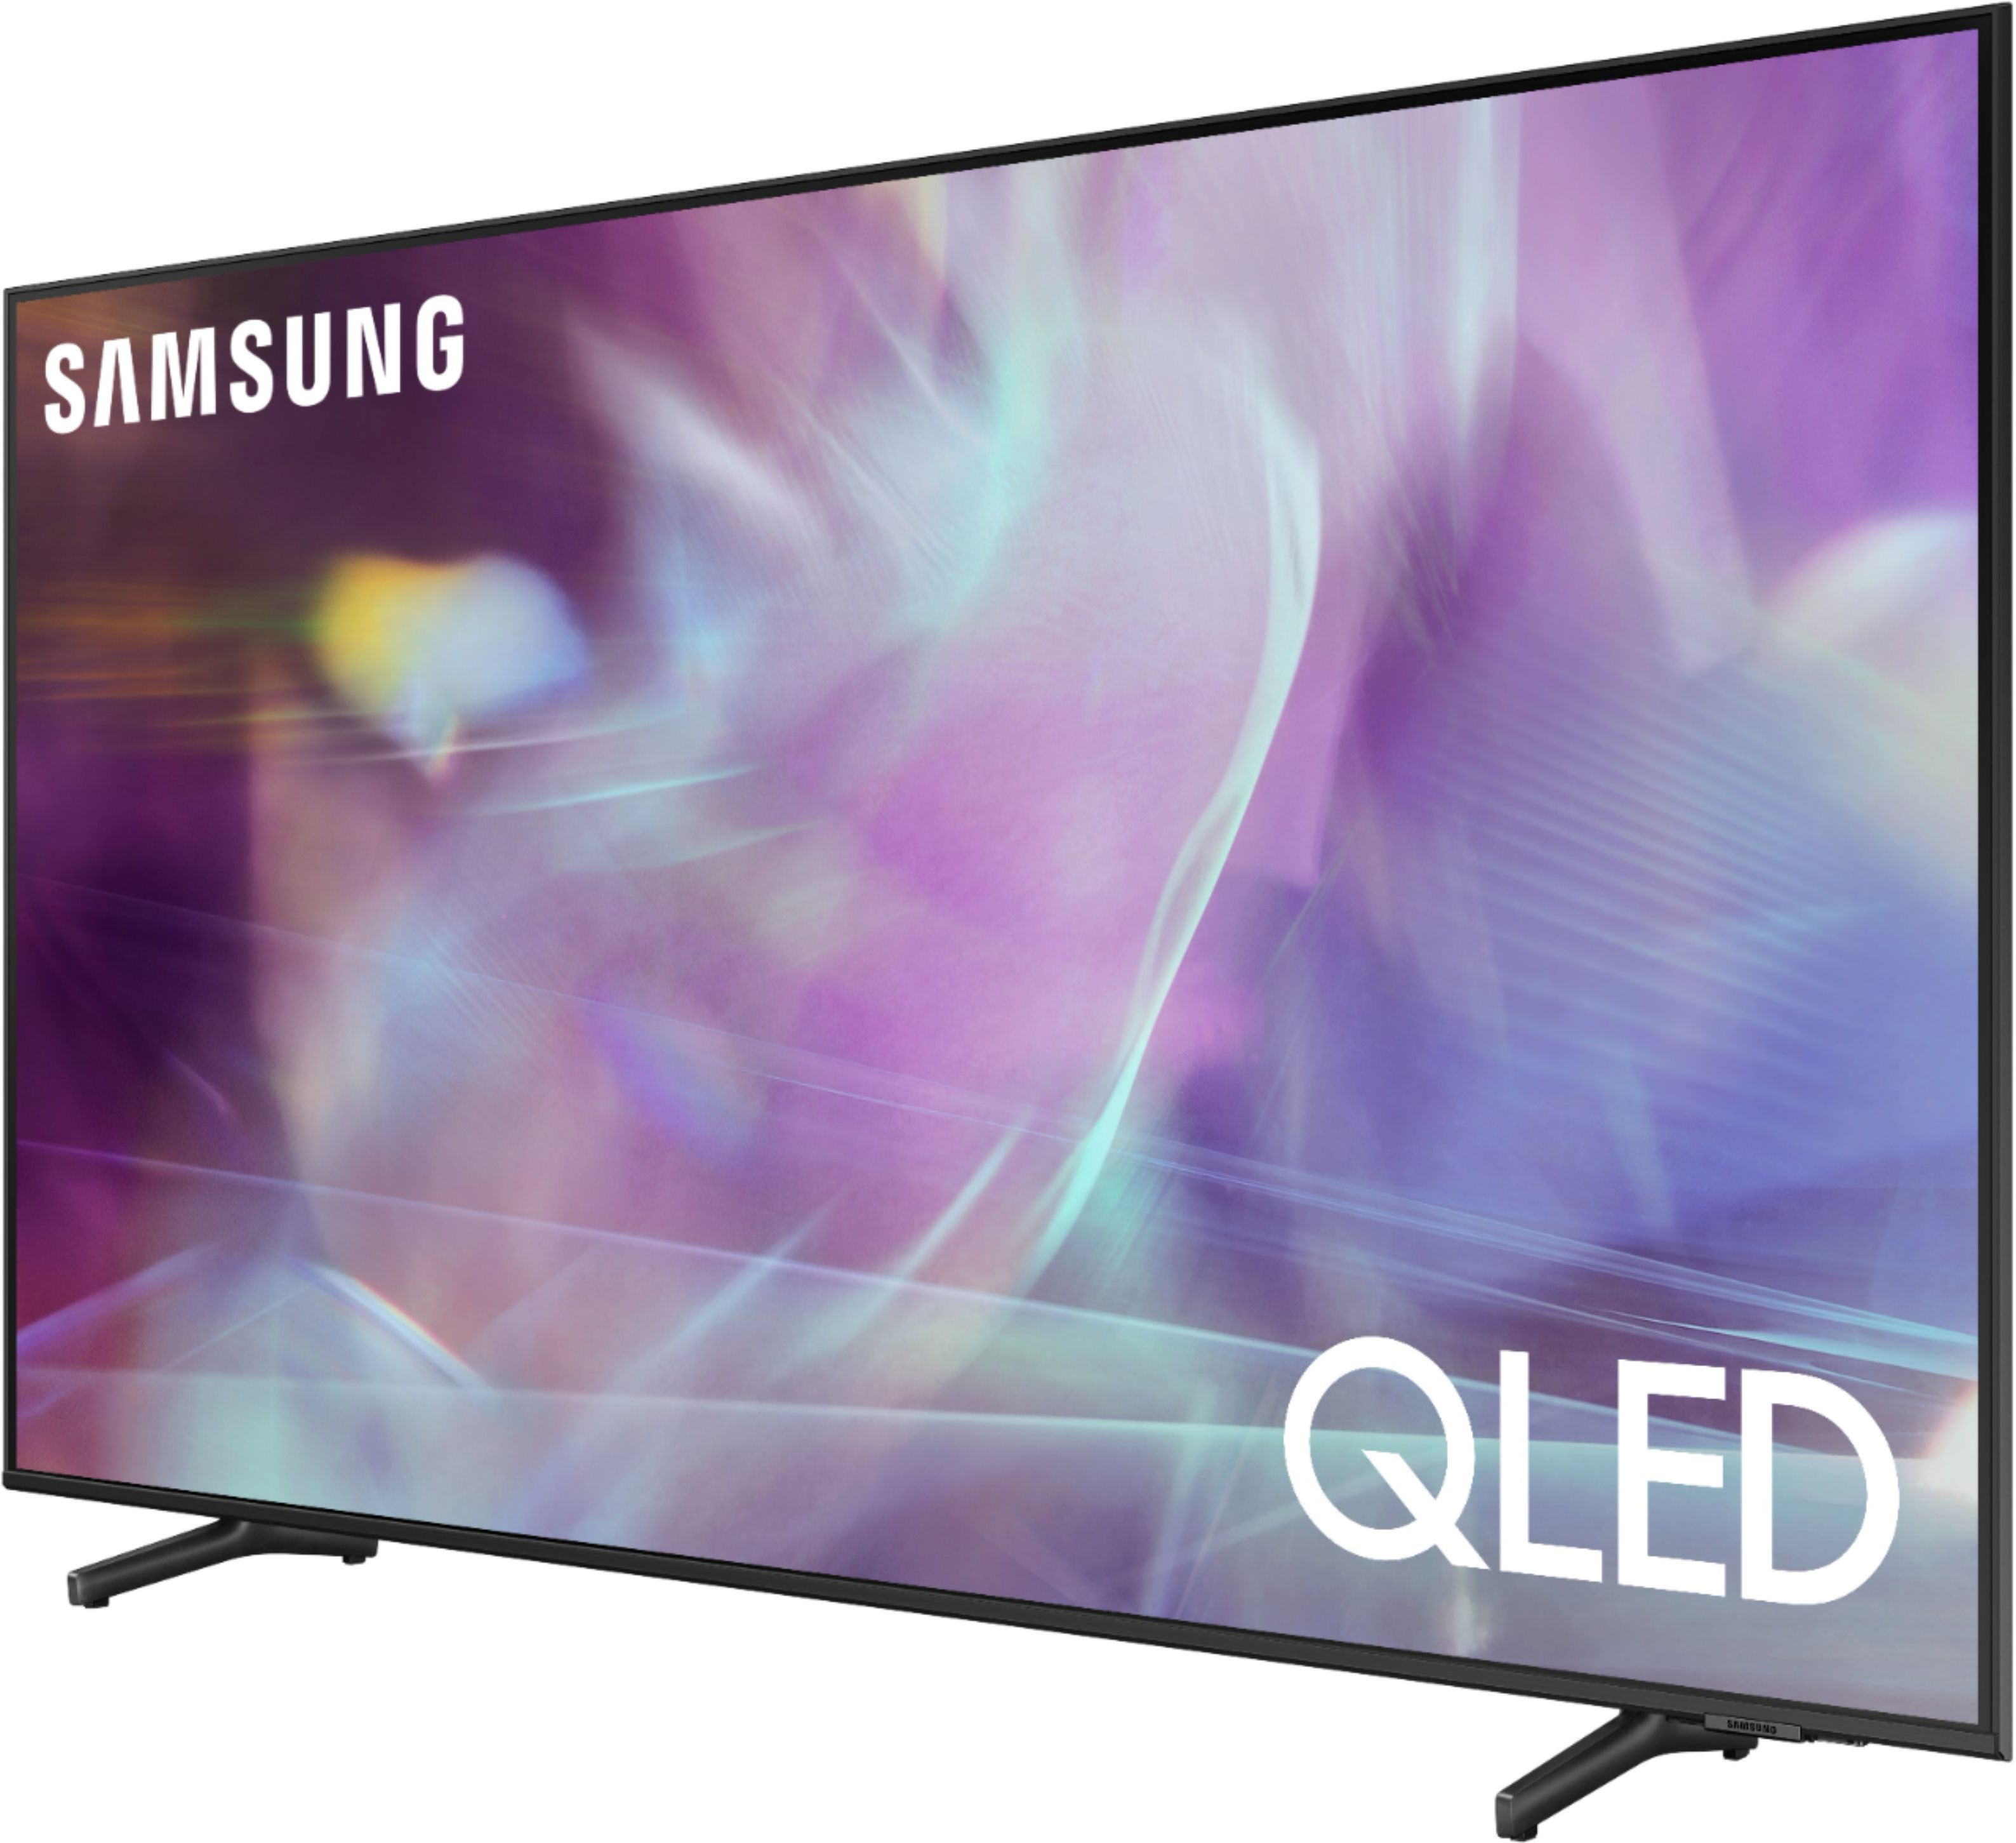 How Much Does a 60 Inch Led TV Weight